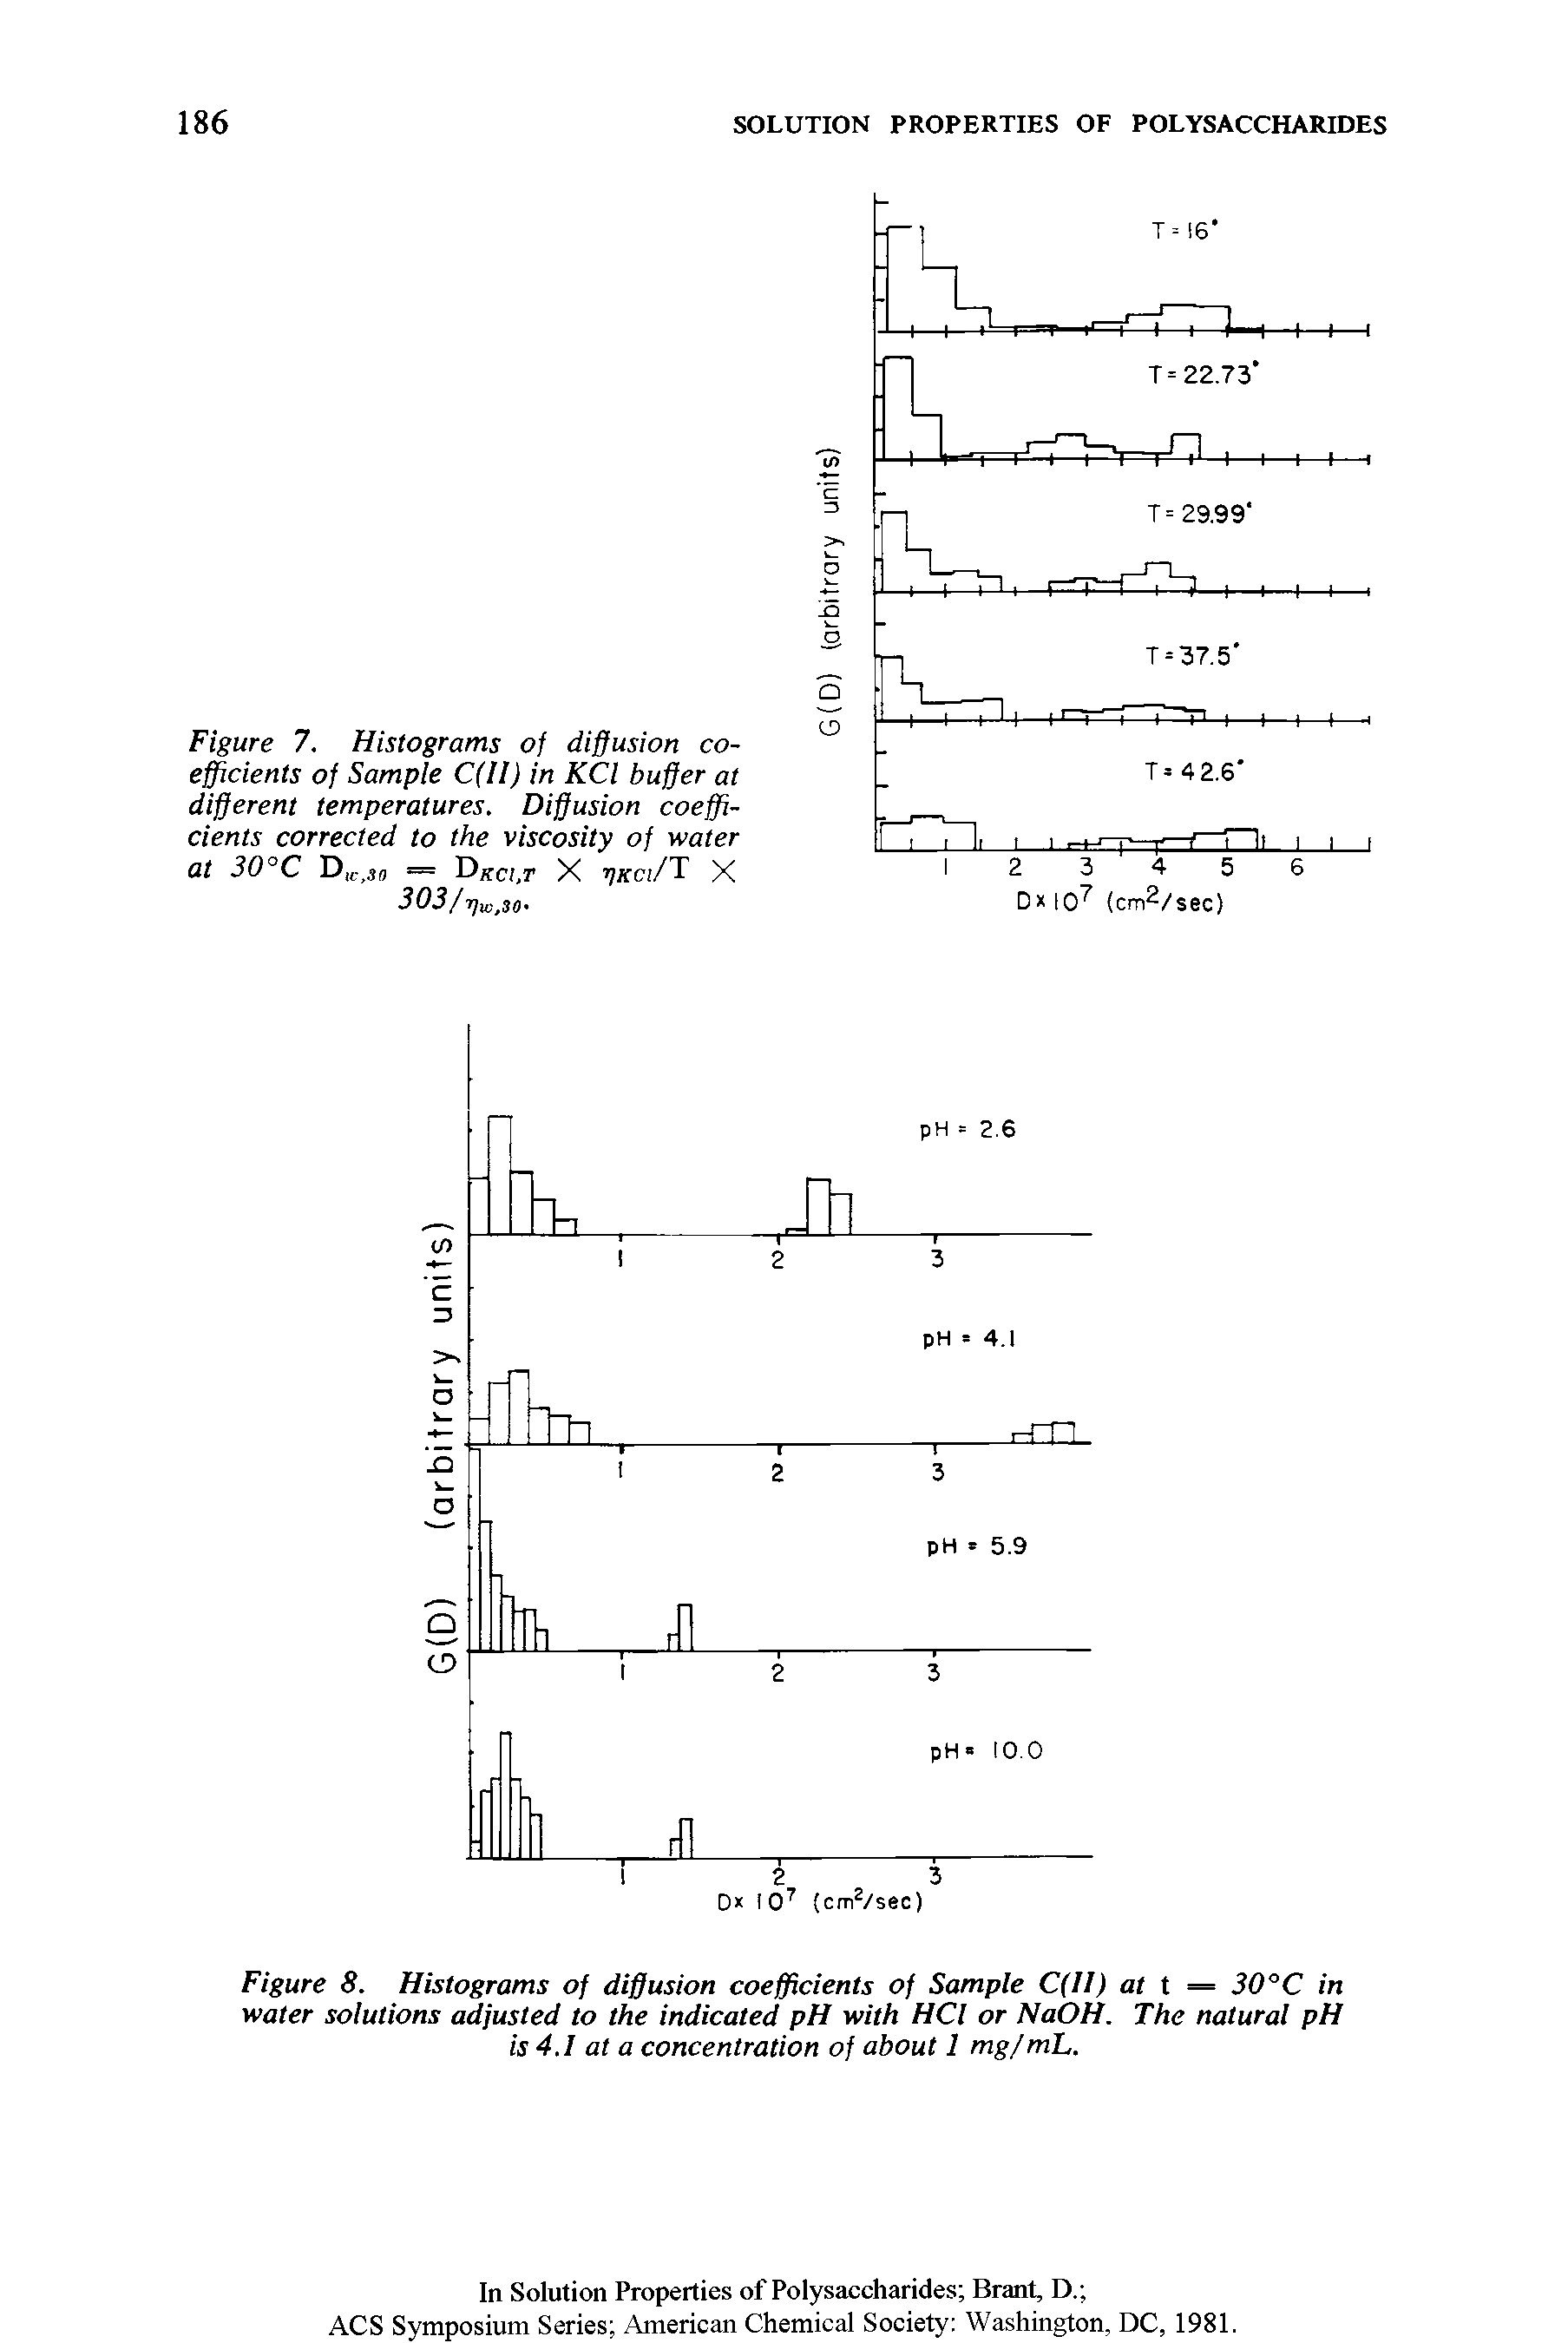 Figure 7. Histograms of diffusion coefficients of Sample C(II) in KCl buffer at different temperatures. Diffusion coefficients corrected to the viscosity of water at 30°C D c,3o = Duci.t X t)Kci/Ti X 303/ qxo.SO.